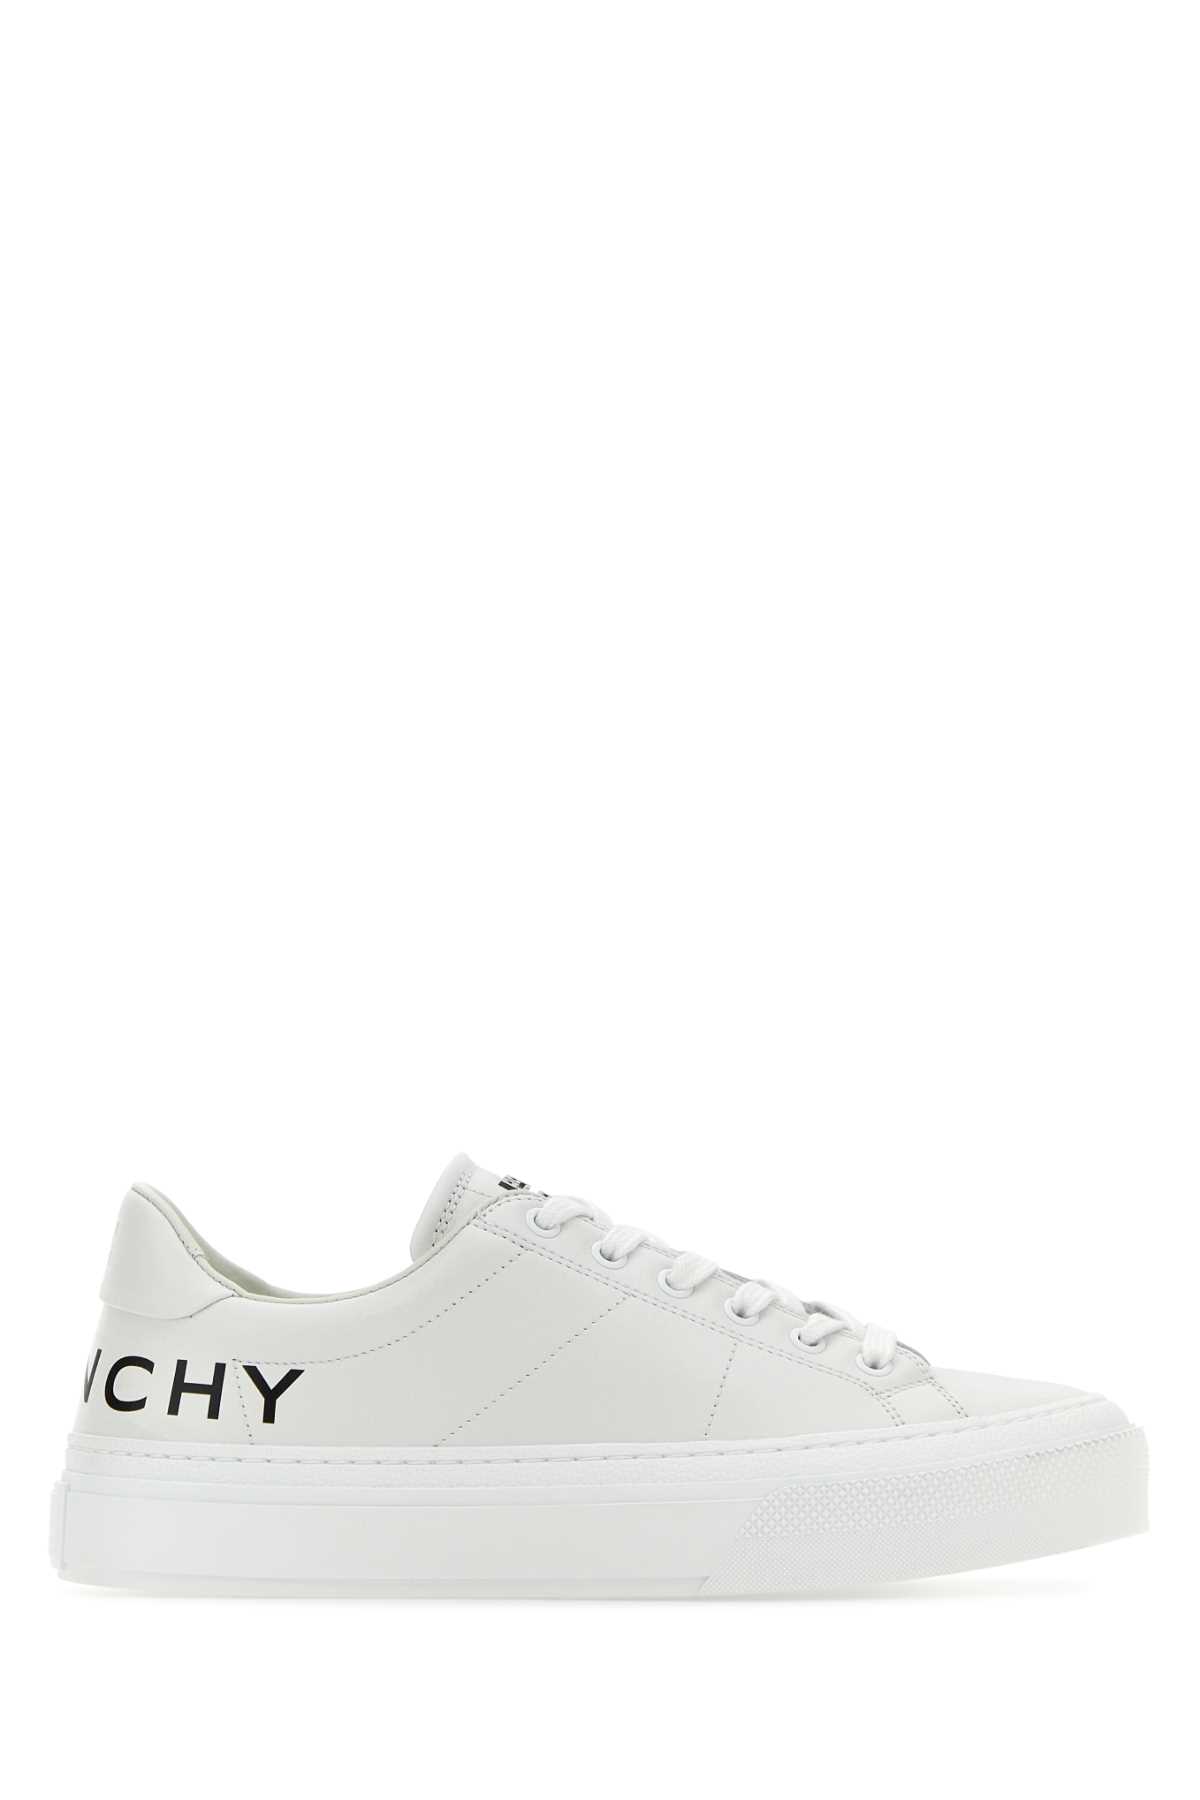 Shop Givenchy White Leather City Sport Sneakers In Whiteblack